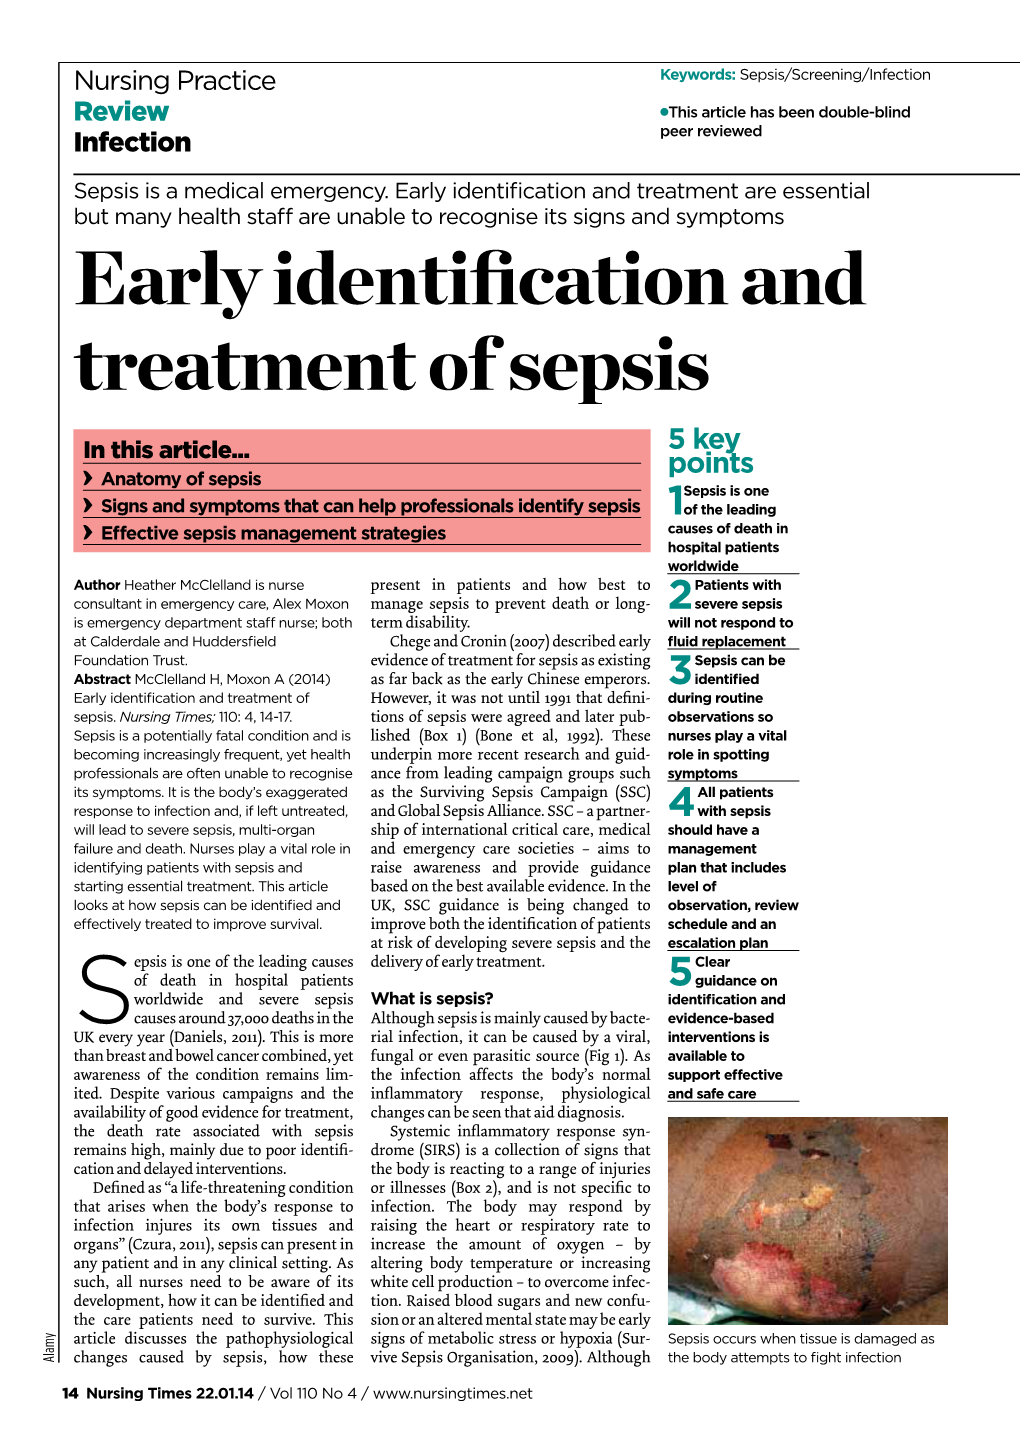 Early Identification and Treatment of Sepsis 5 Key in This Article